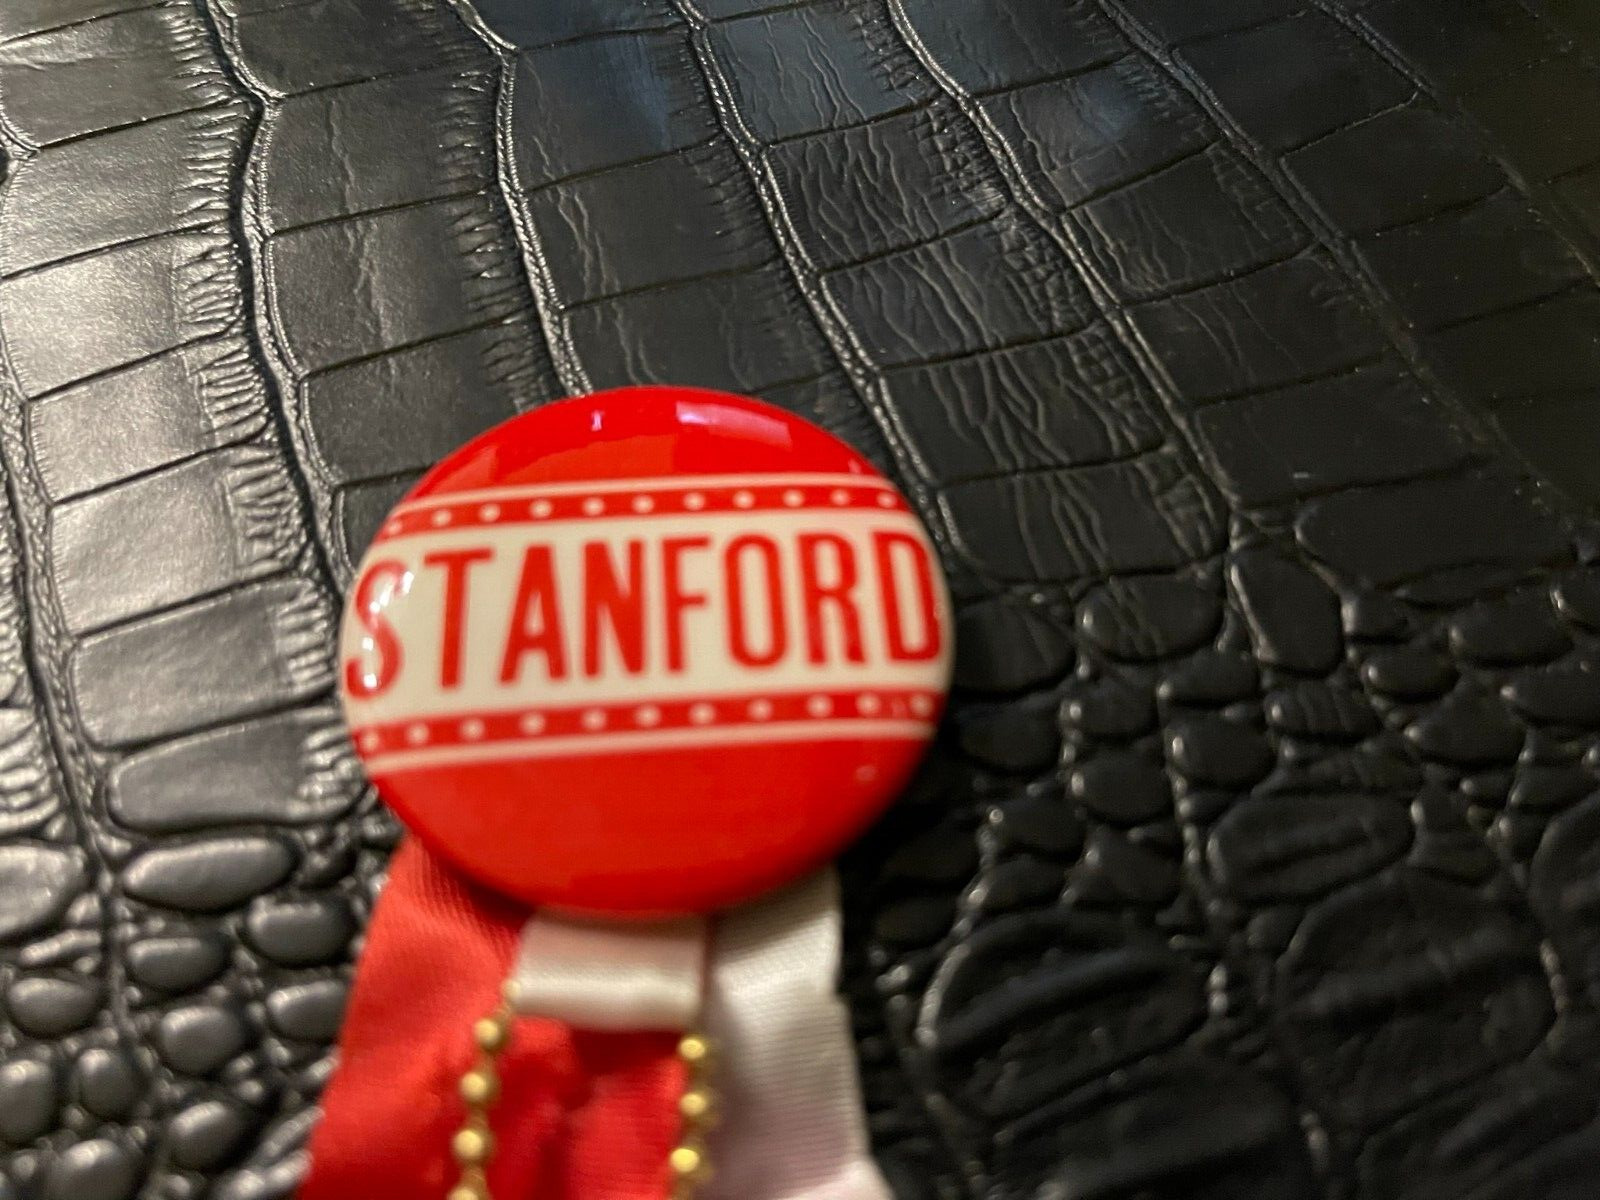 1960s NOS Stanford University Football Pinback w/ribbons and football charm